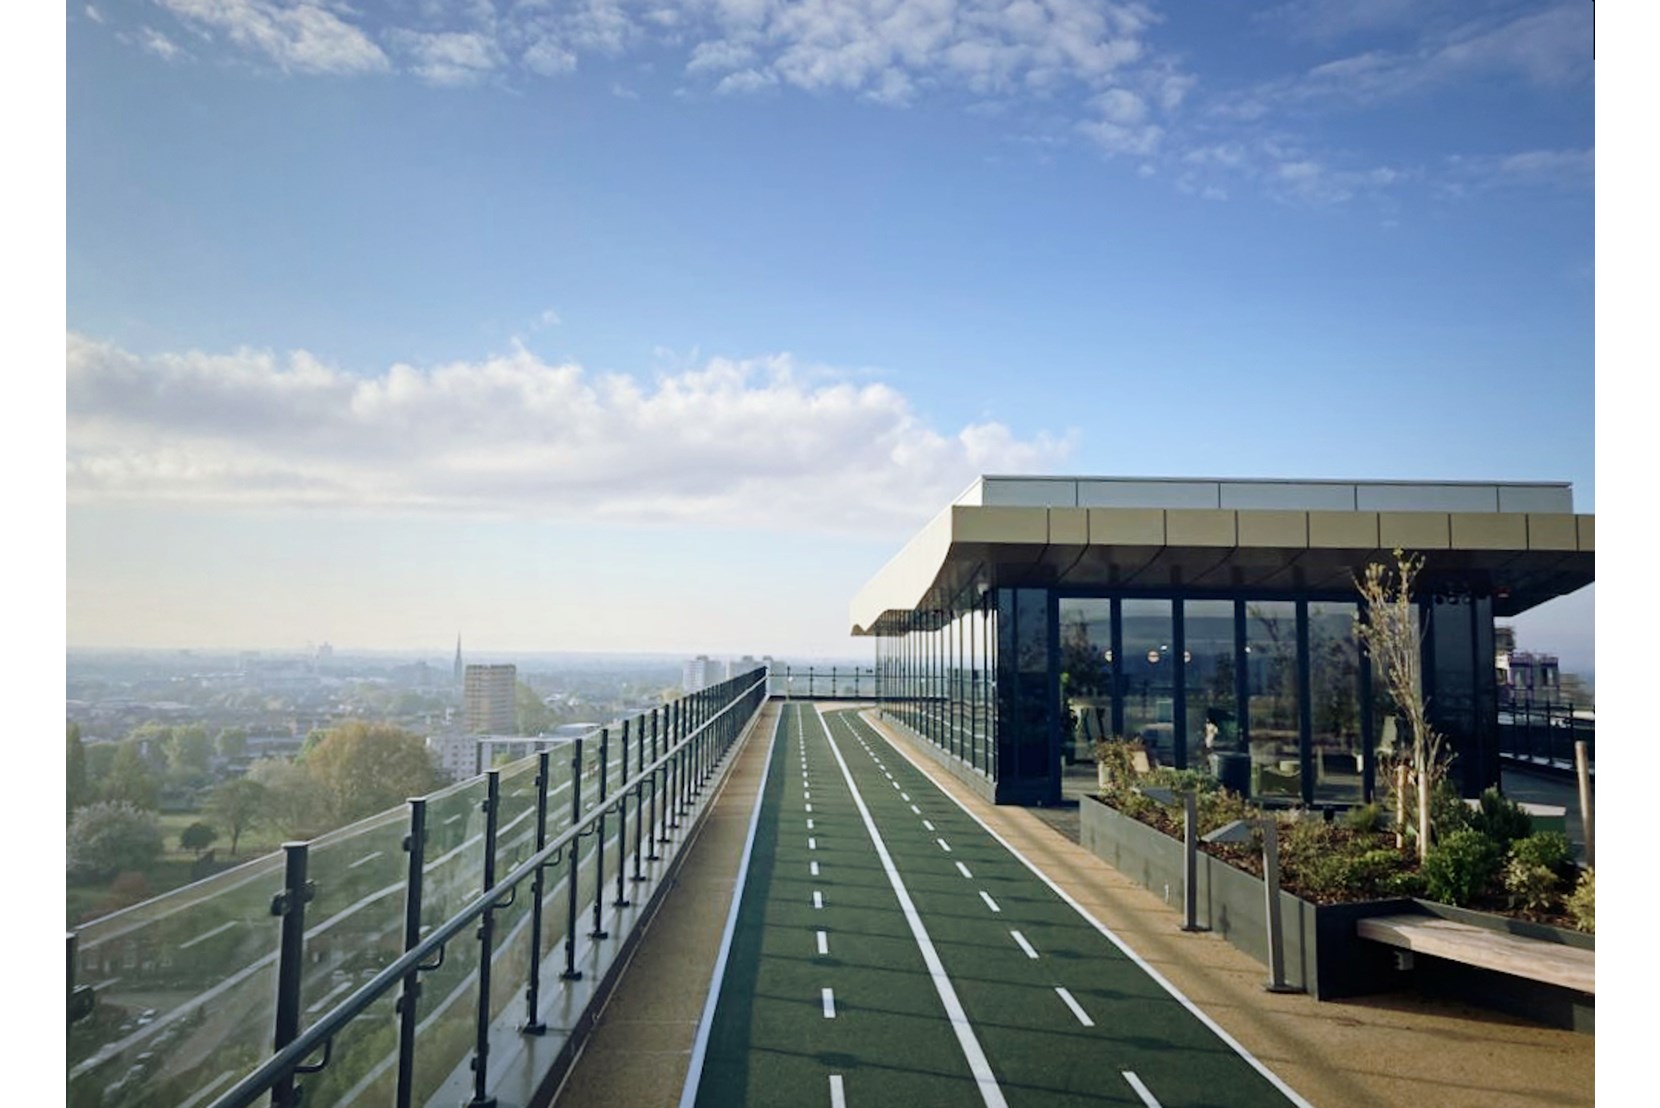 Apartments to Rent by Allsop at Vox, Manchester, M15, roof terrace running track